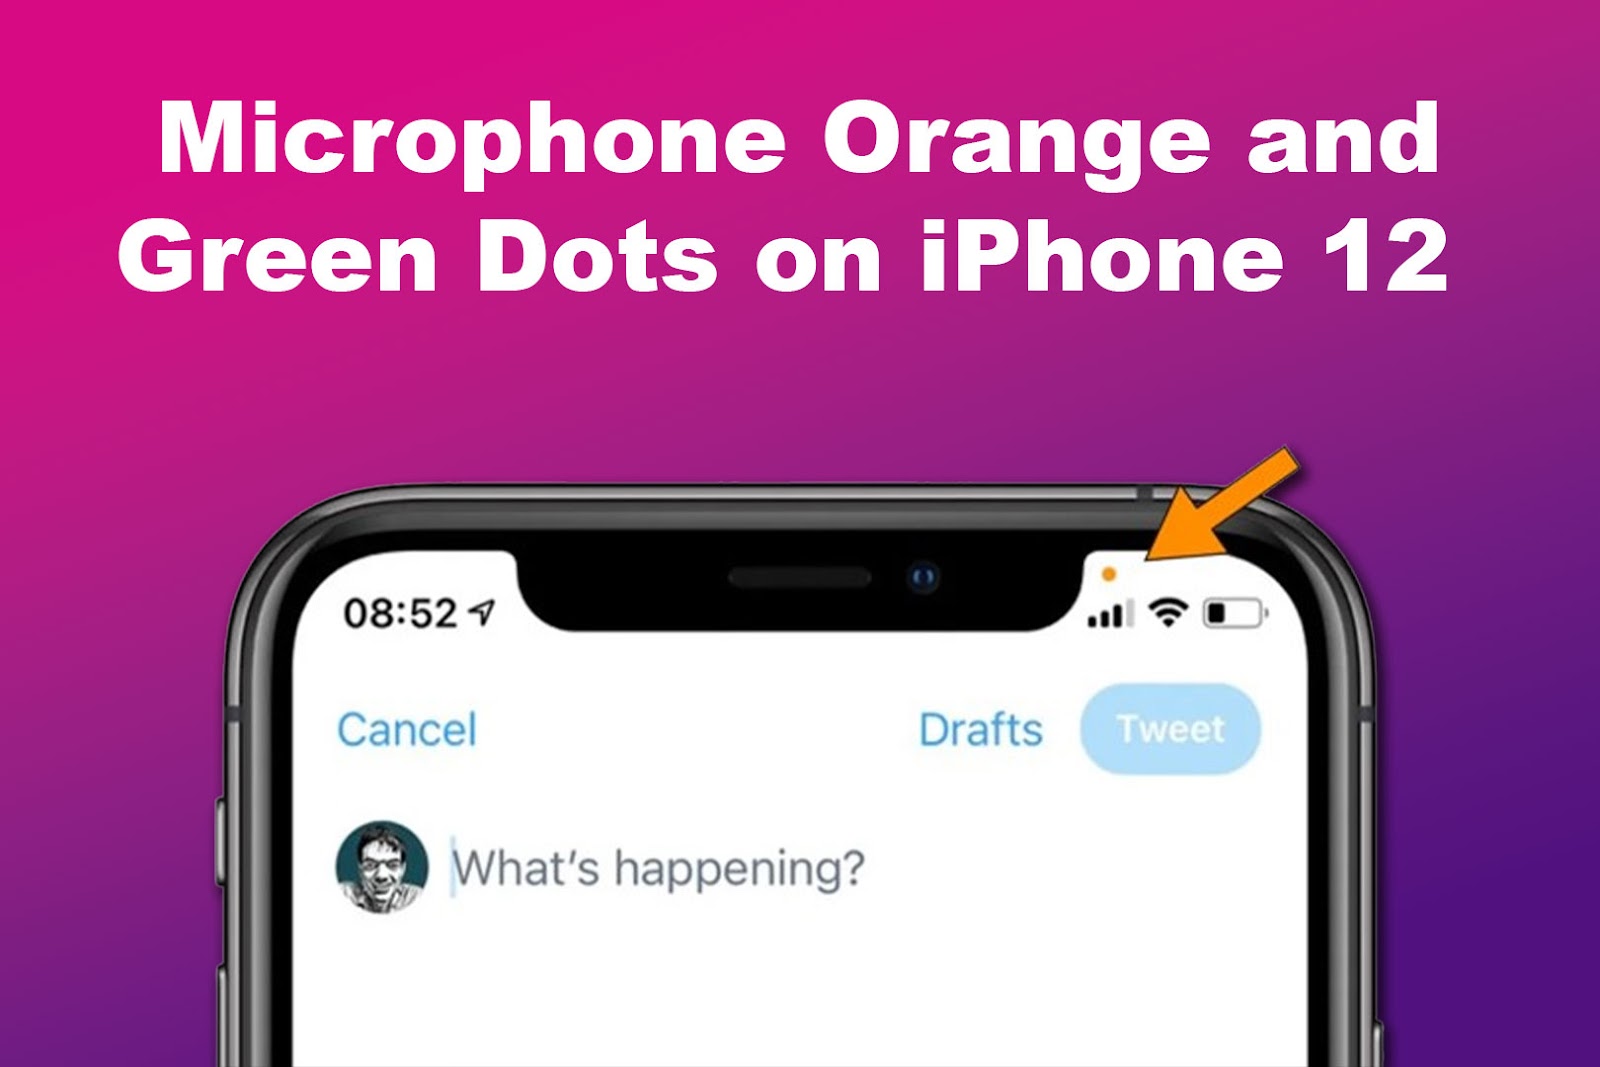 Microphone Orange and Green Dots on iPhone 12